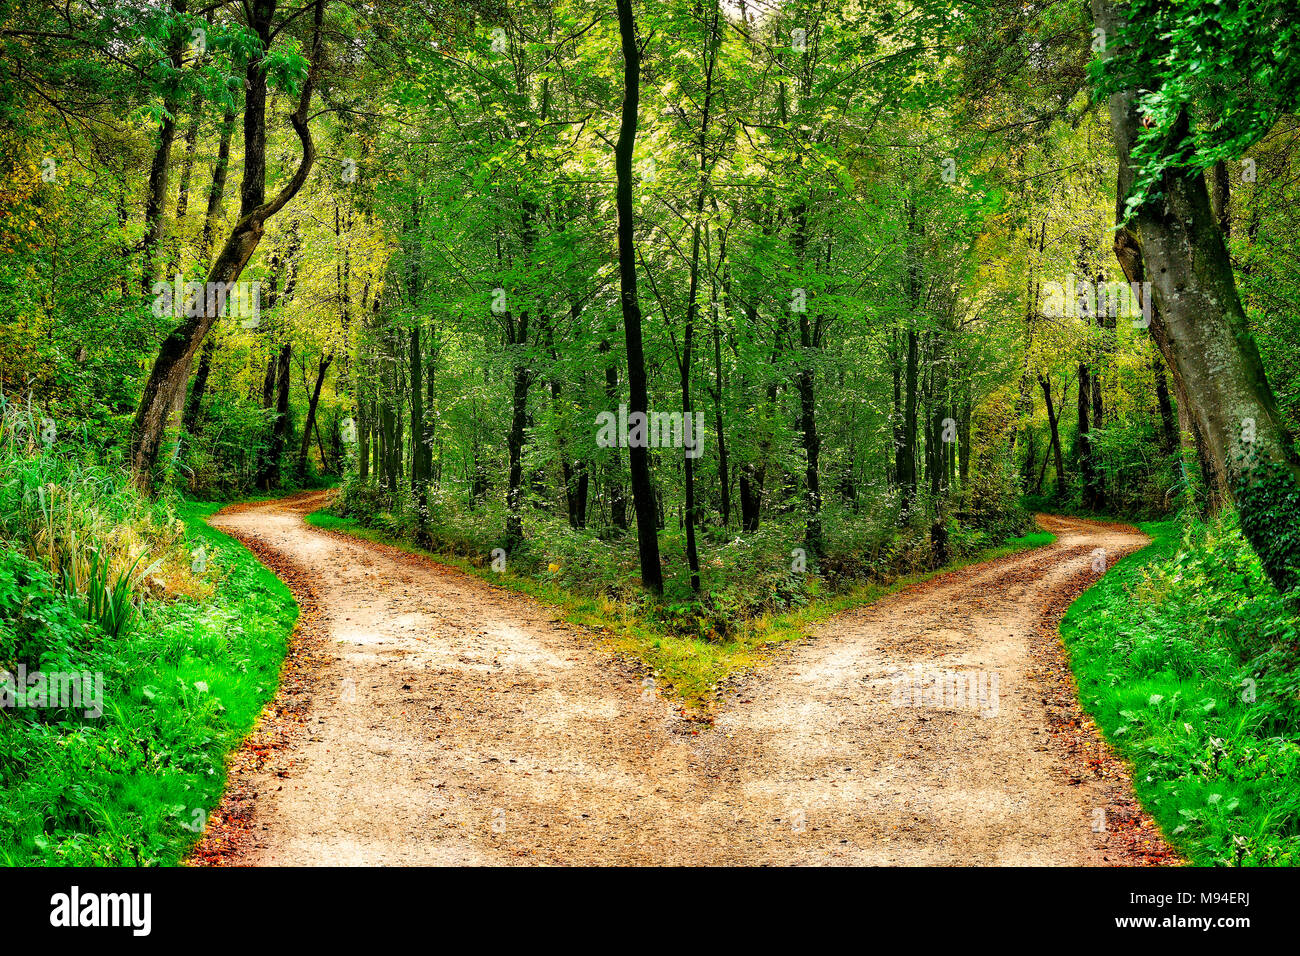 A forest path divides in two different directions Stock Photo